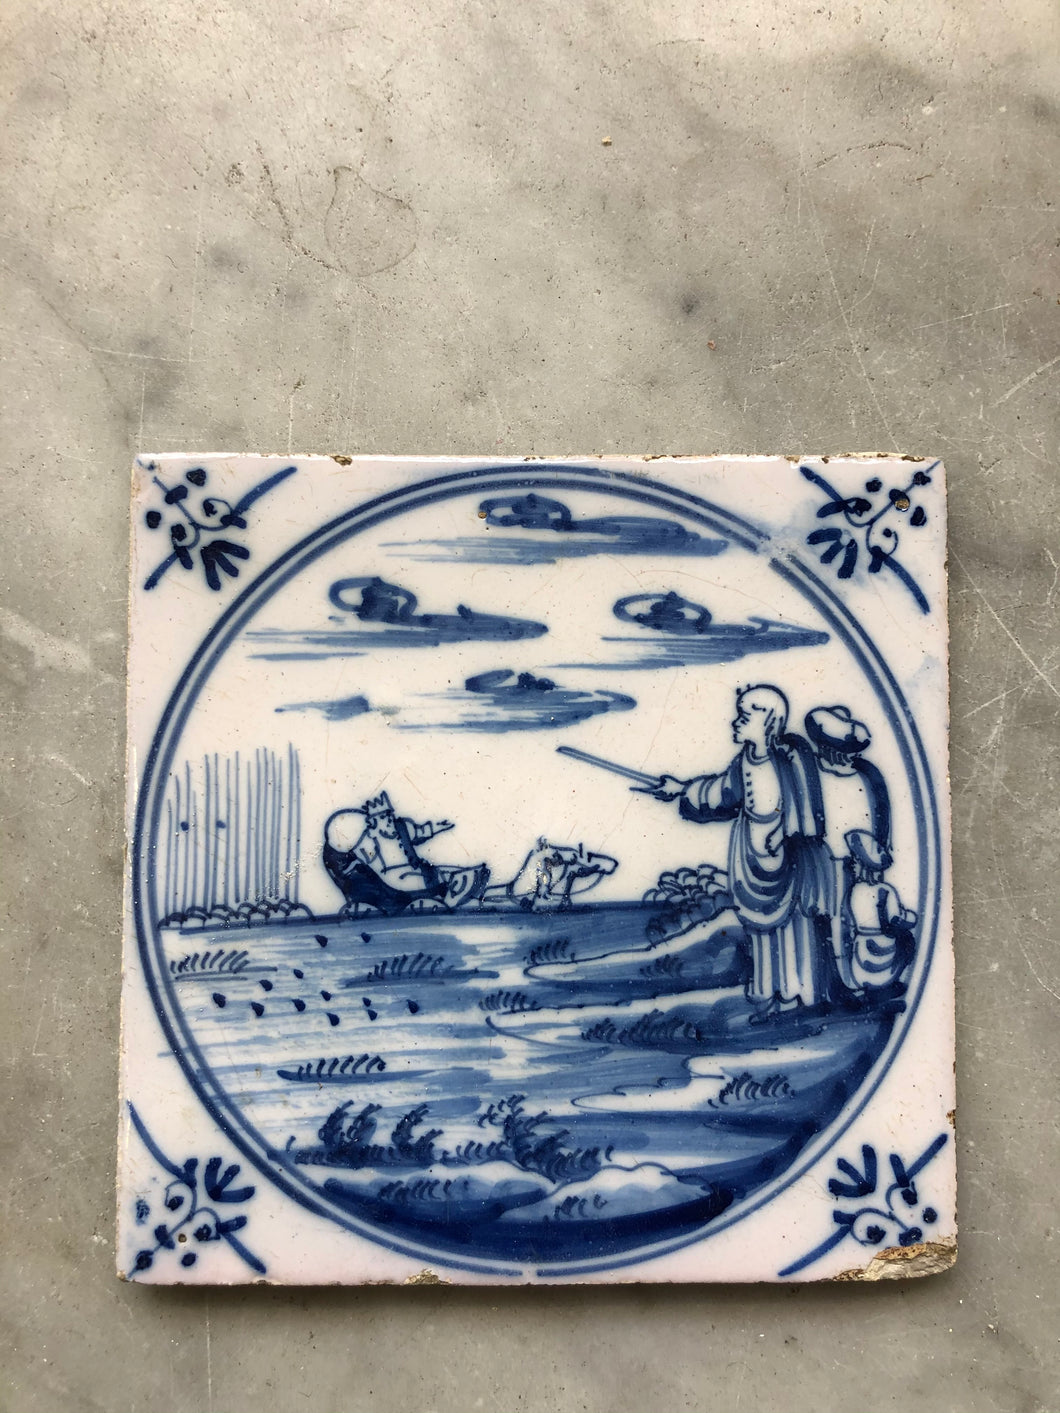 18 th century delft century delft tile with pharao